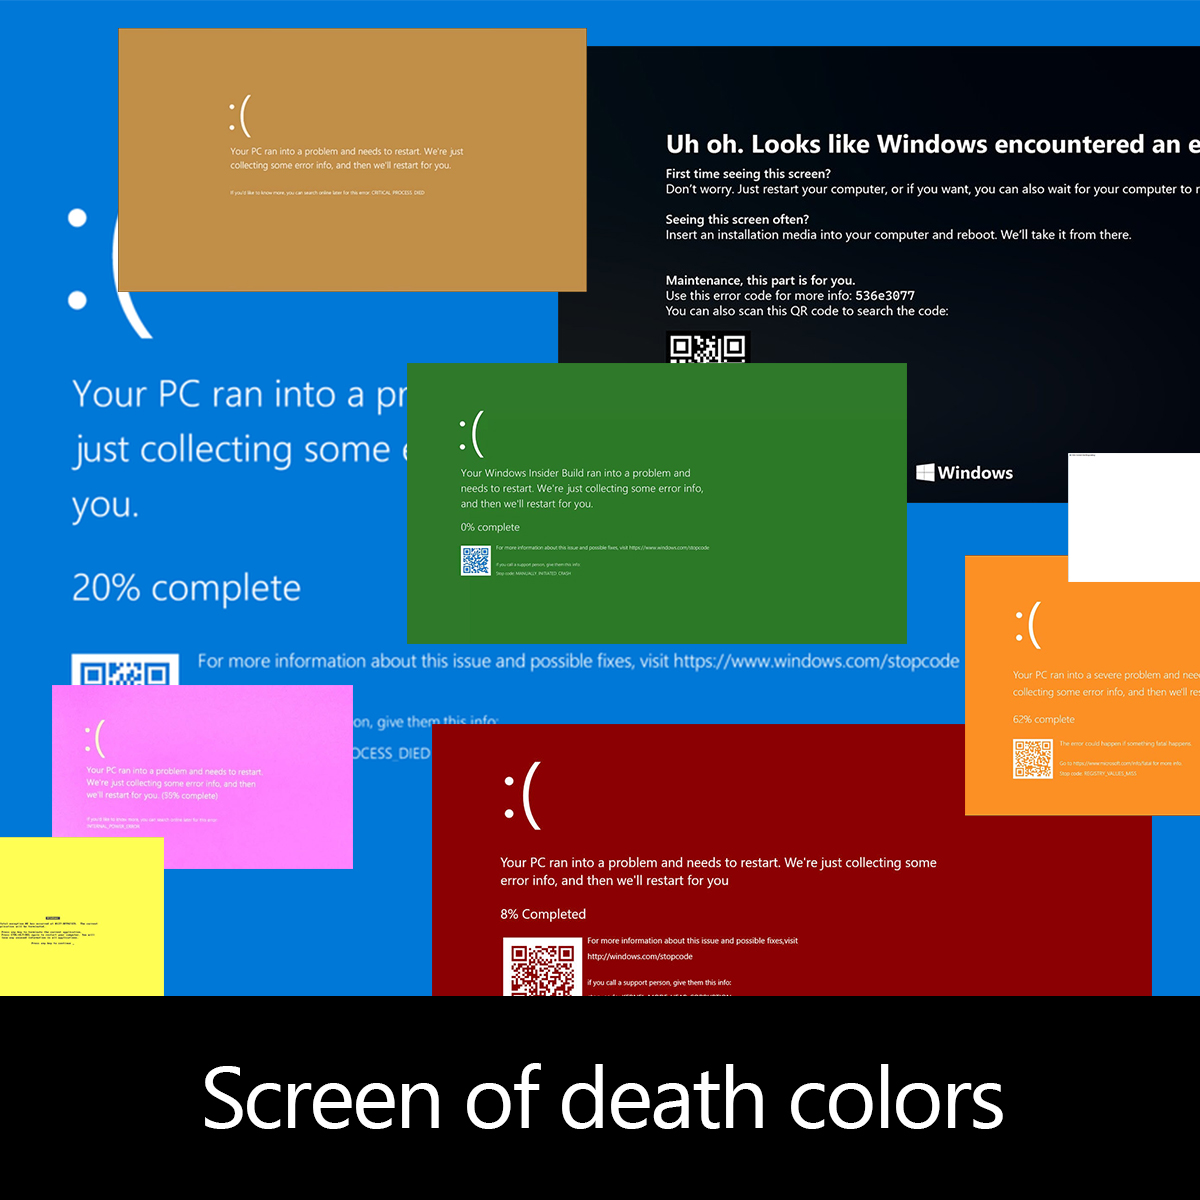 windows 10 colors are messed up